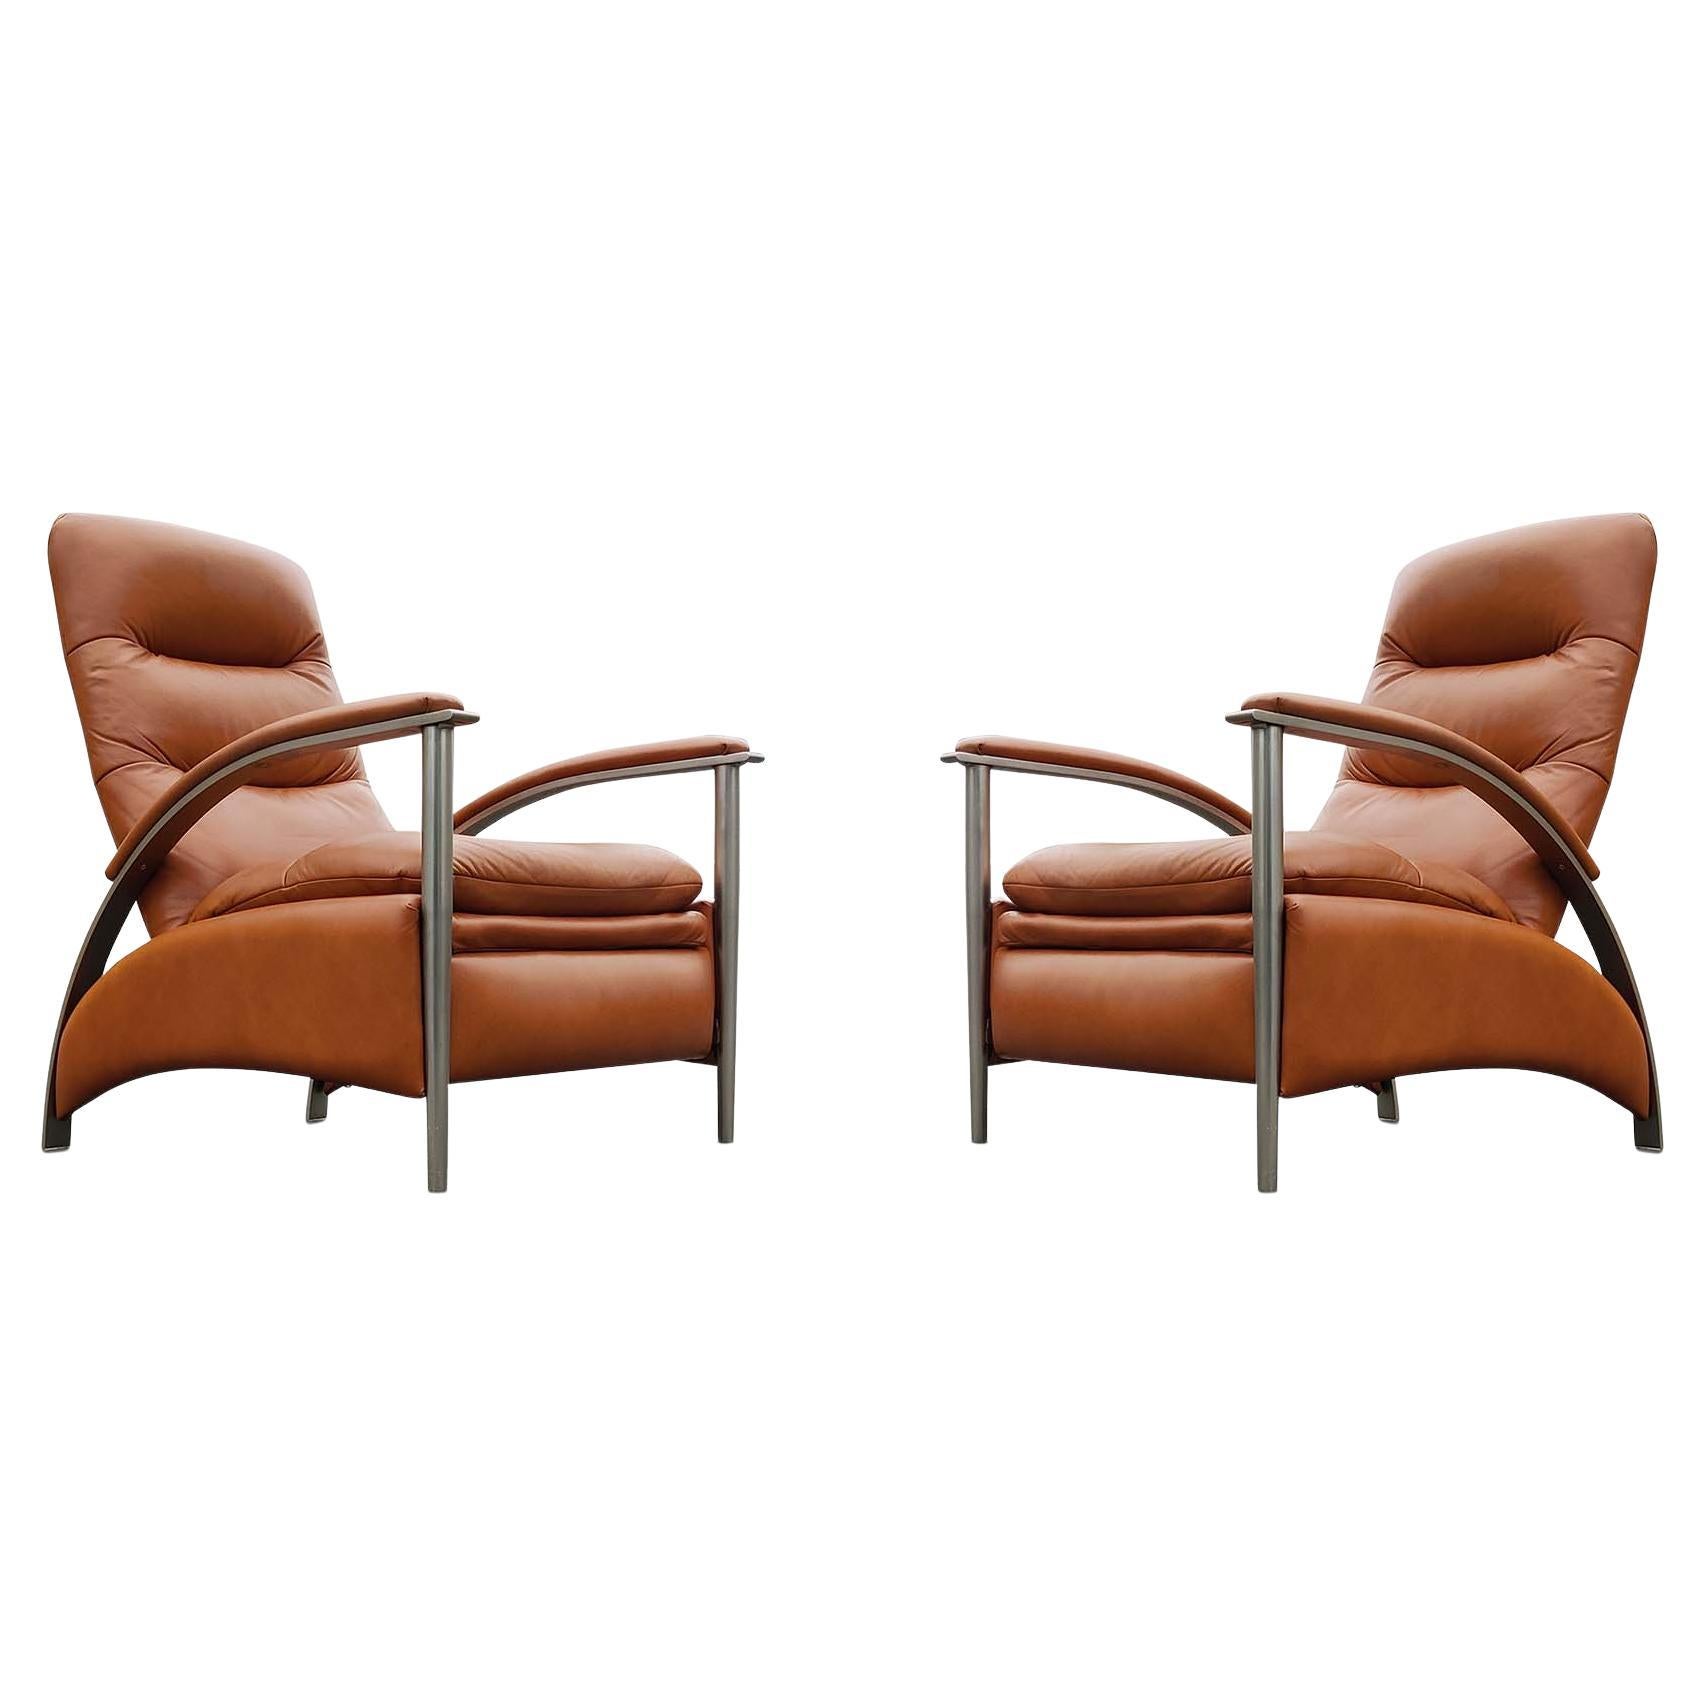 A very stylish and super comfortable pair of 'Radius' reclining lounge chairs, in the manner of Milo Bauhgman. American-made, circa 1990s or early 2000s, this substantial pair of chairs has a very attractive orange-brown leather upholstery. The